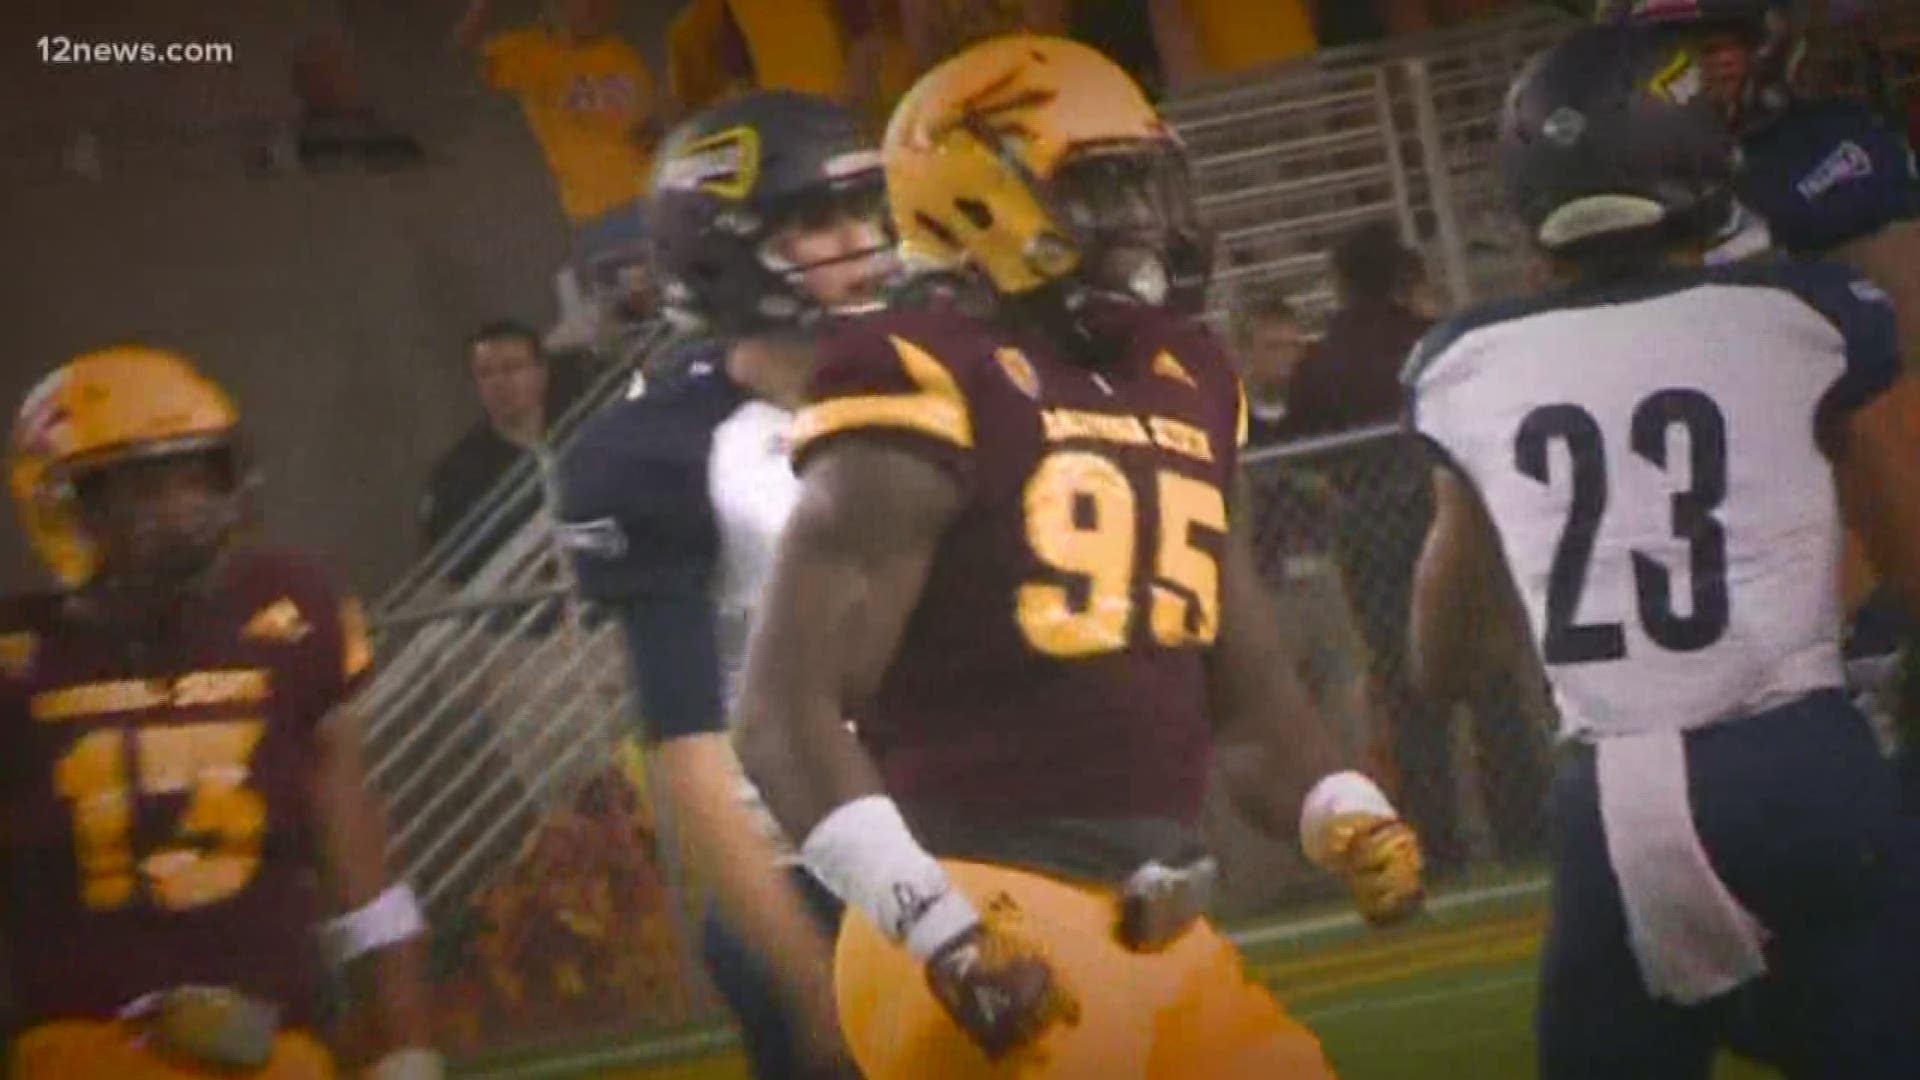 Arizona State defensive tackle Renell Wren is built for success in the NFL. Listed at 6’5 and 315 pounds, Wren turned heads when he finished as the top-rated defensive tackle at the NFL Combine. So how did he get here? 12Sports’ Cameron Cox brings you Wren’s draft story.